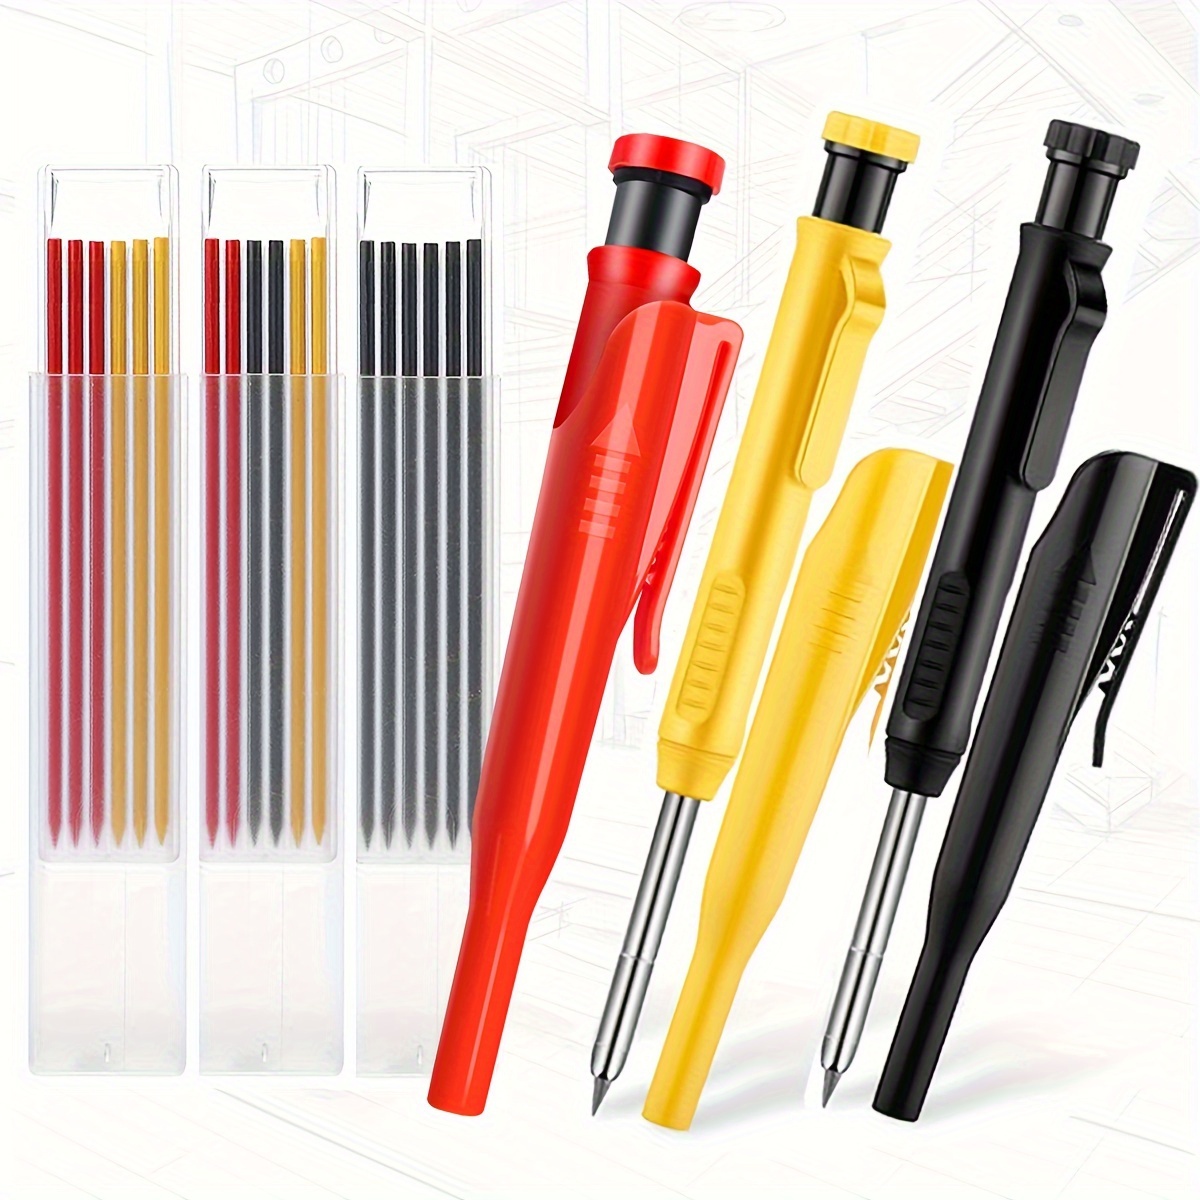 Deep hole movable pen for woodworking Pencil Lead Set 2.8 Marking